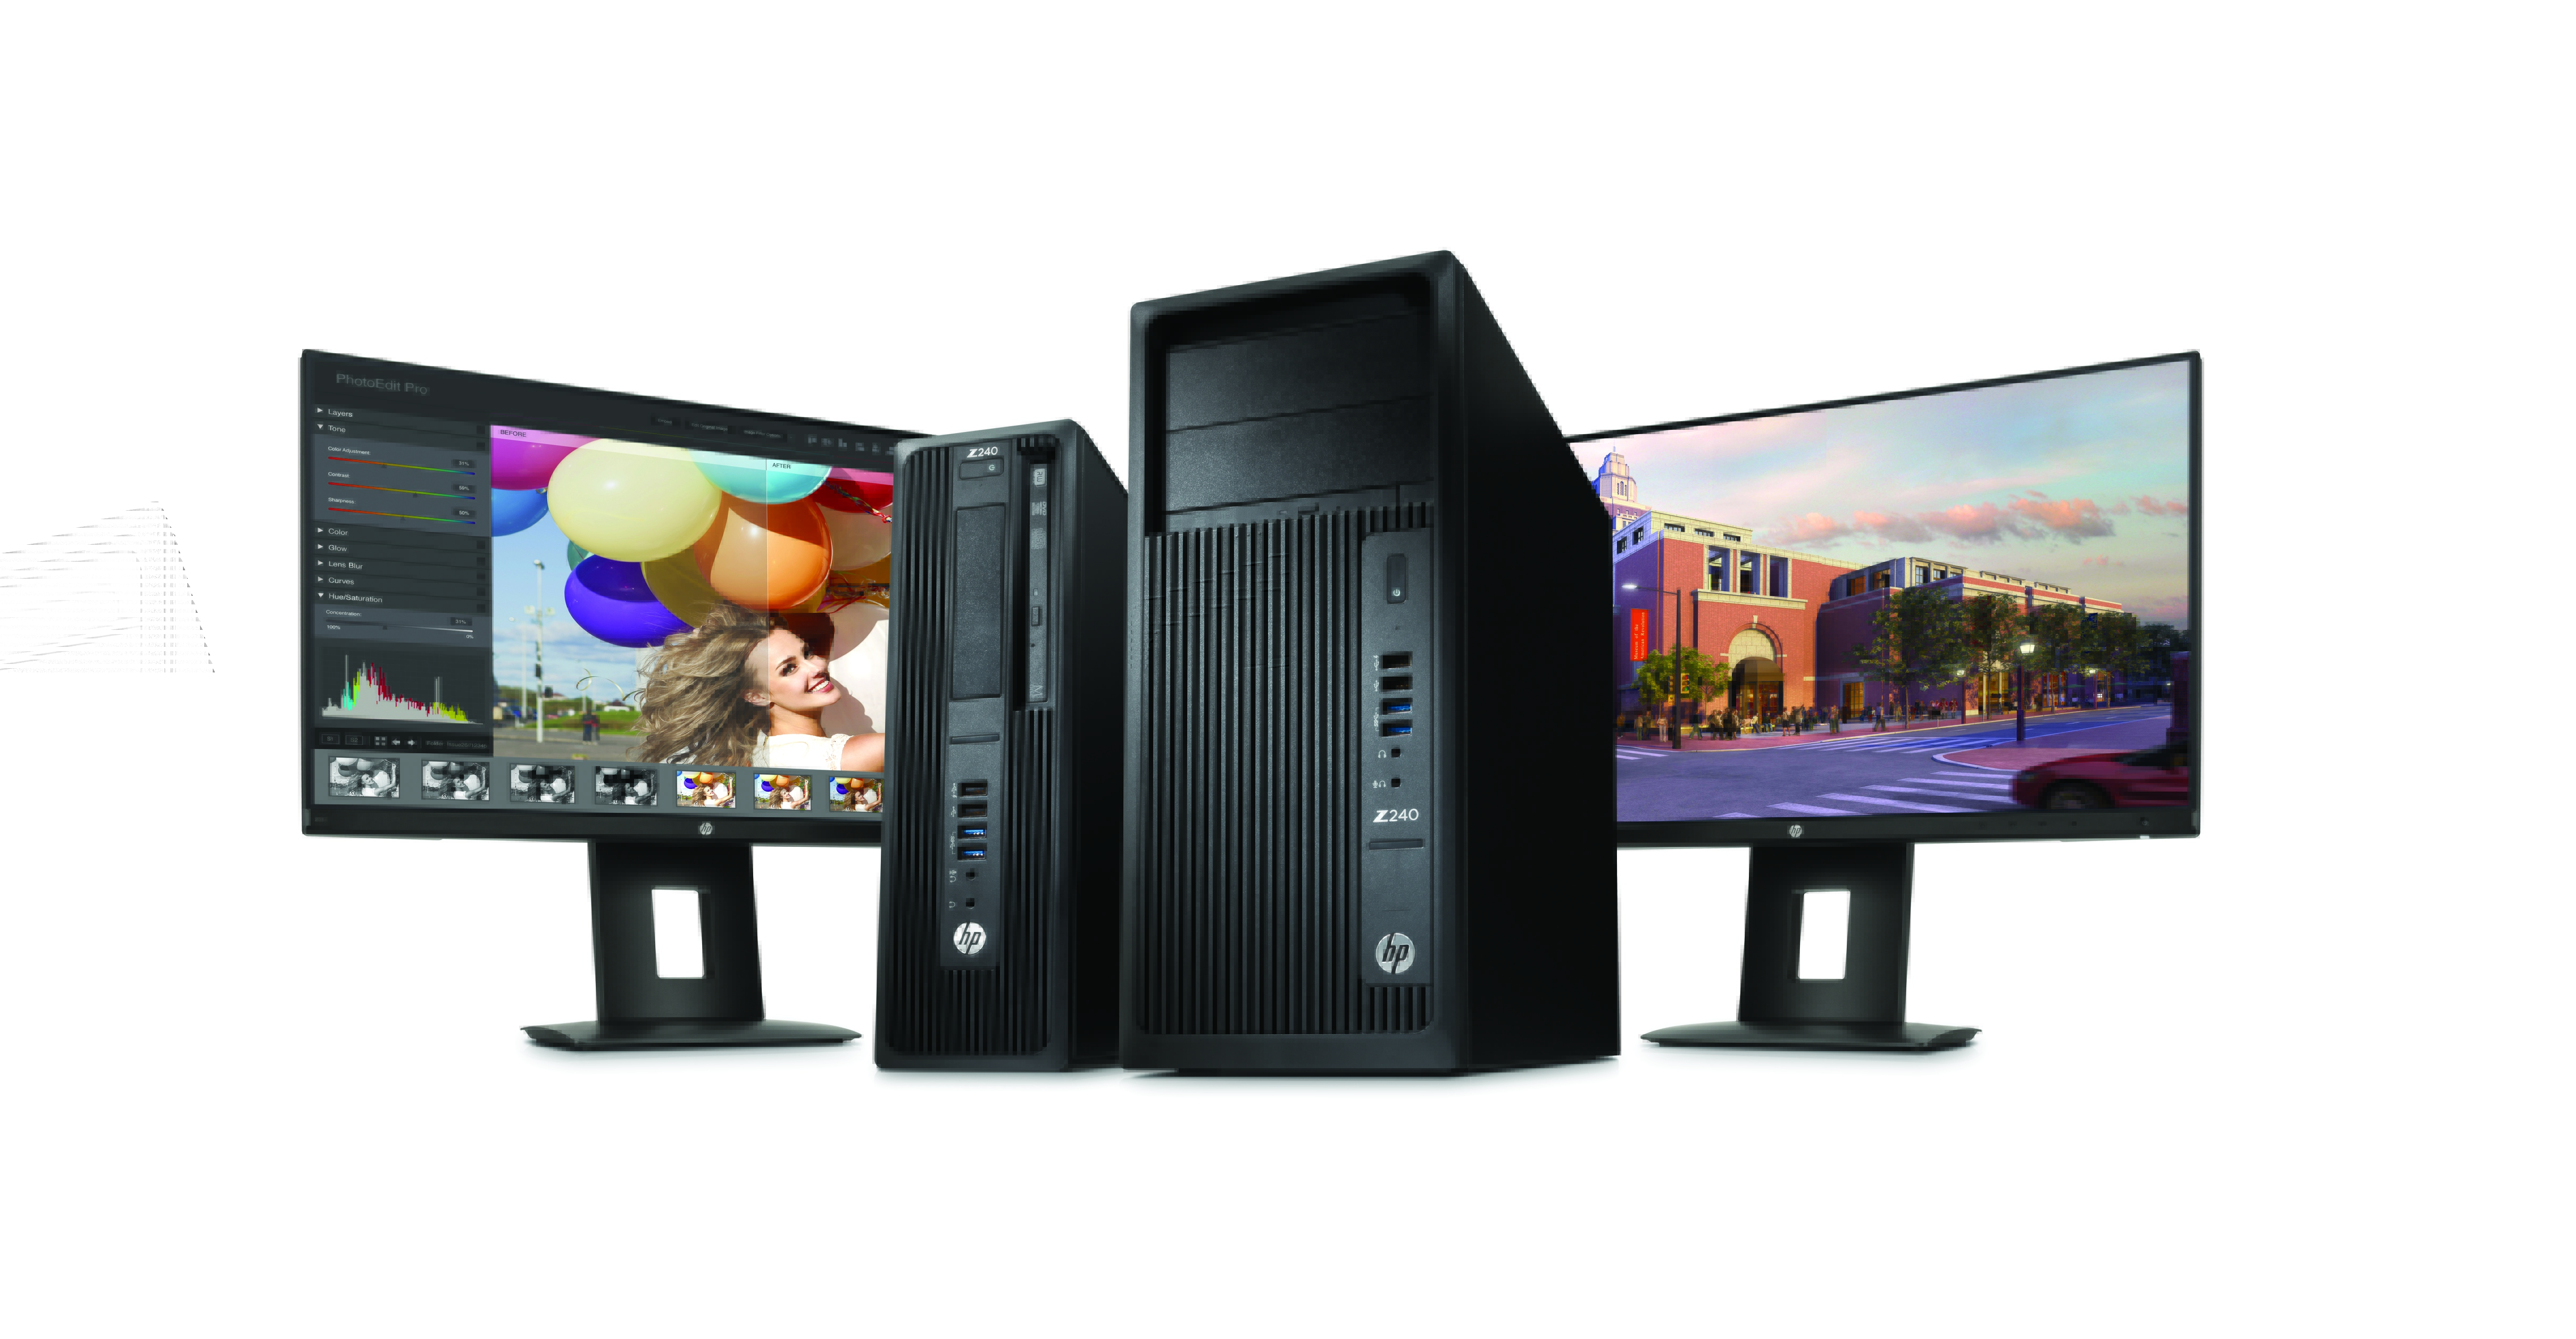 HP Z240 SFF Workstation, HP Z240 Tower Workstation, and Dual HP Z23n Displays